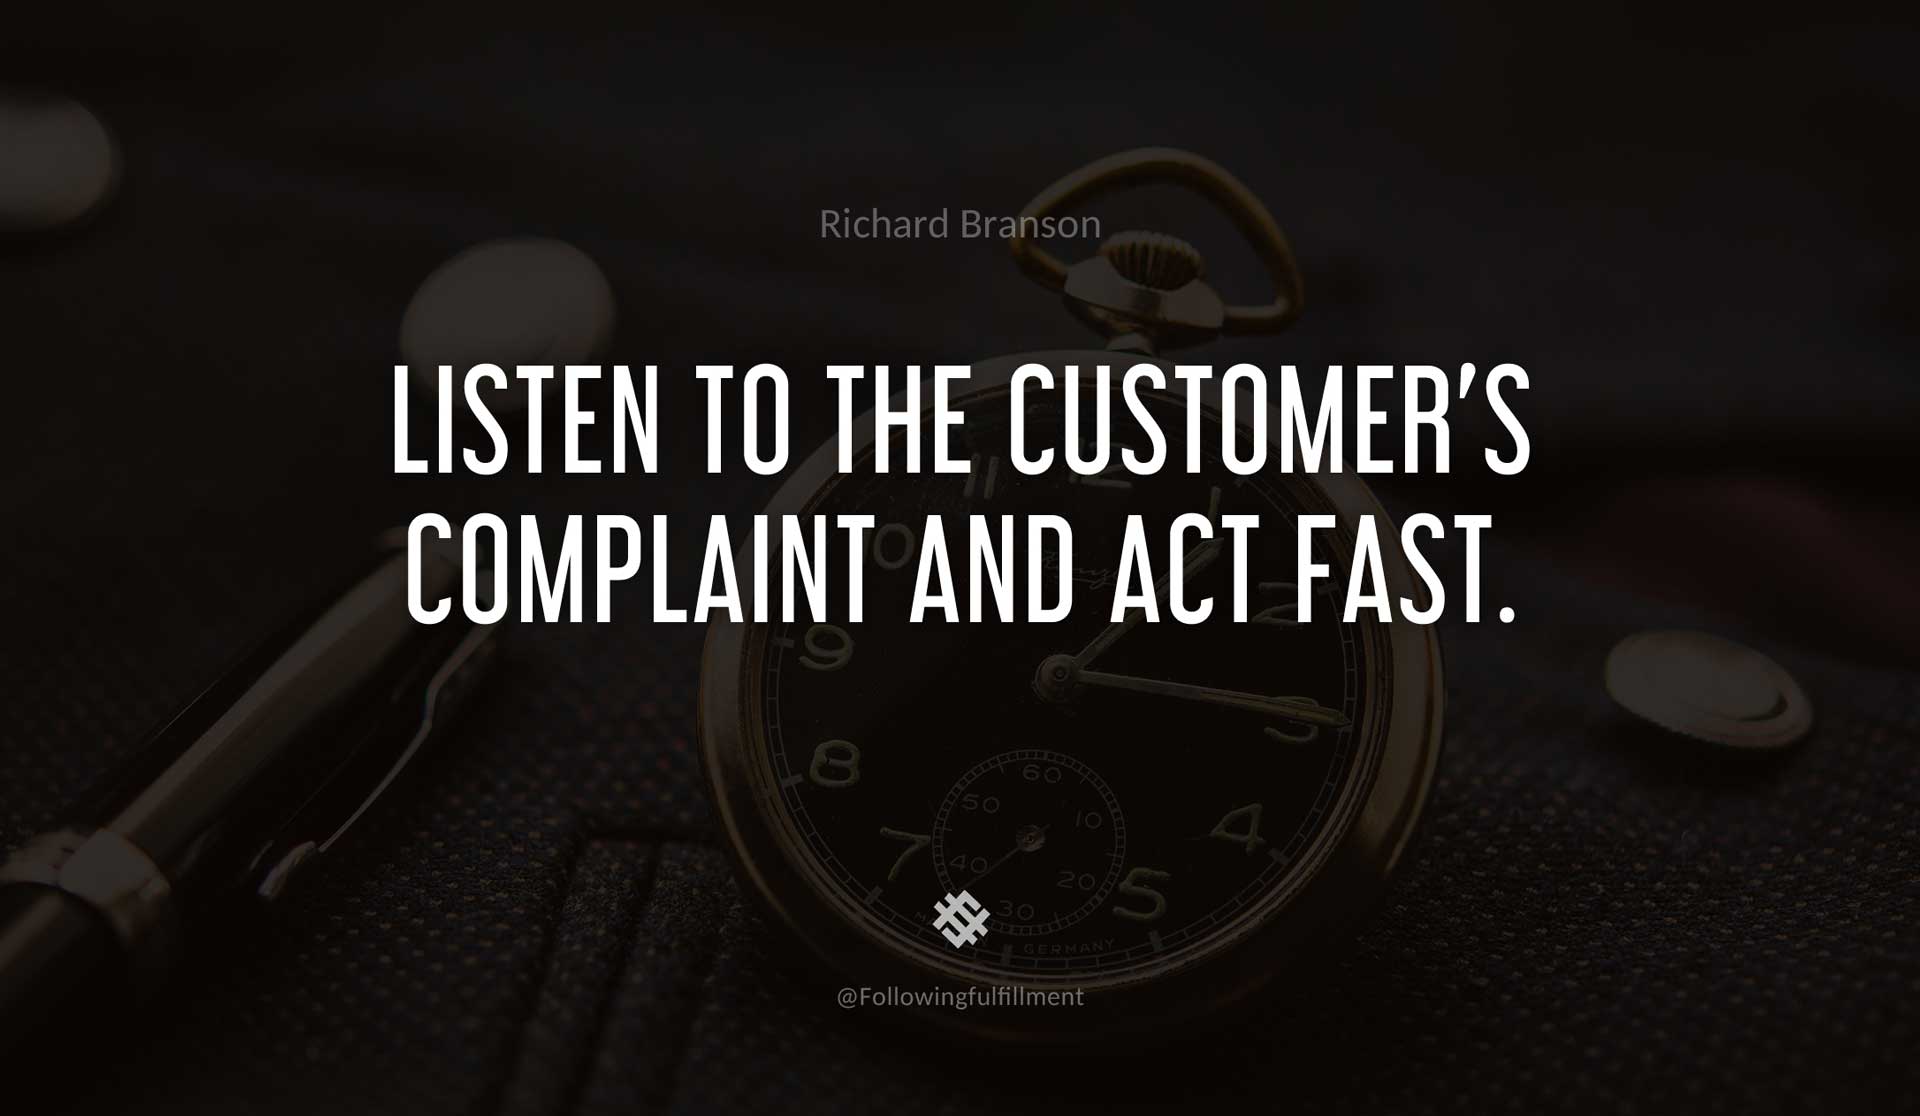 Listen-to-the-customer's-complaint-and-act-fast.-RICHARD-BRANSON-Quote.jpg